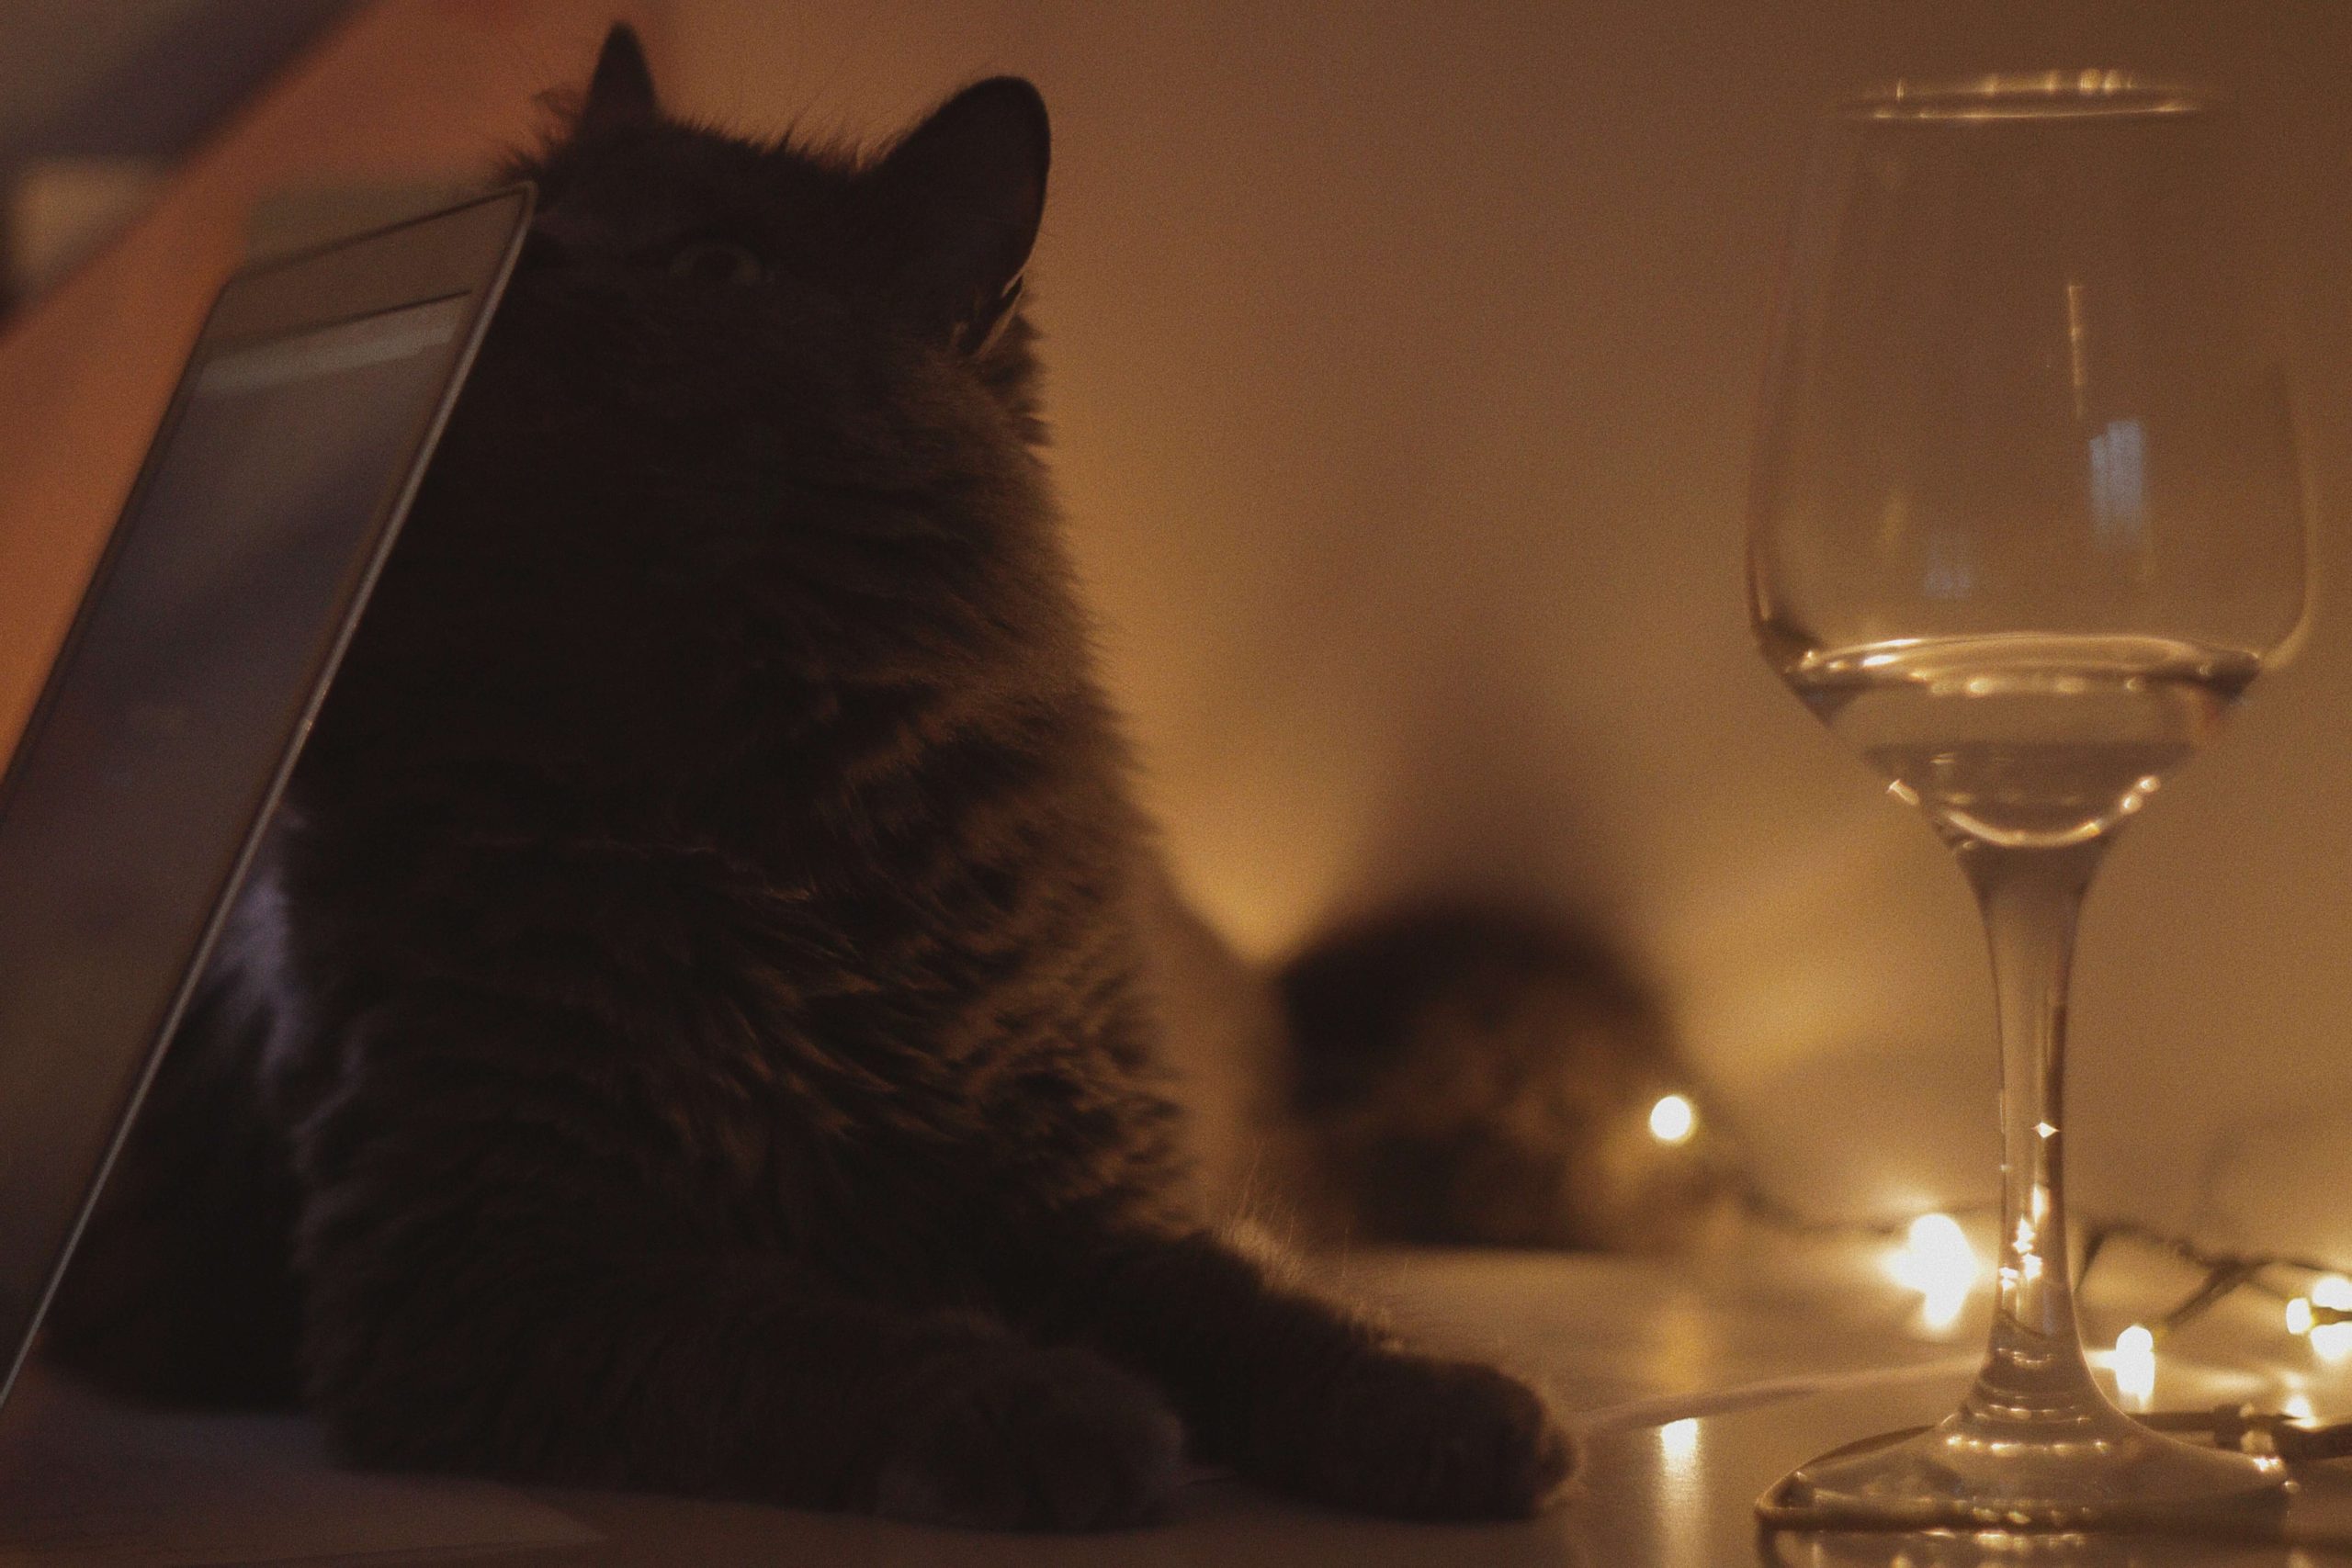 A tabletop with a laptop, a cat and a wine glass that has some wine in it.